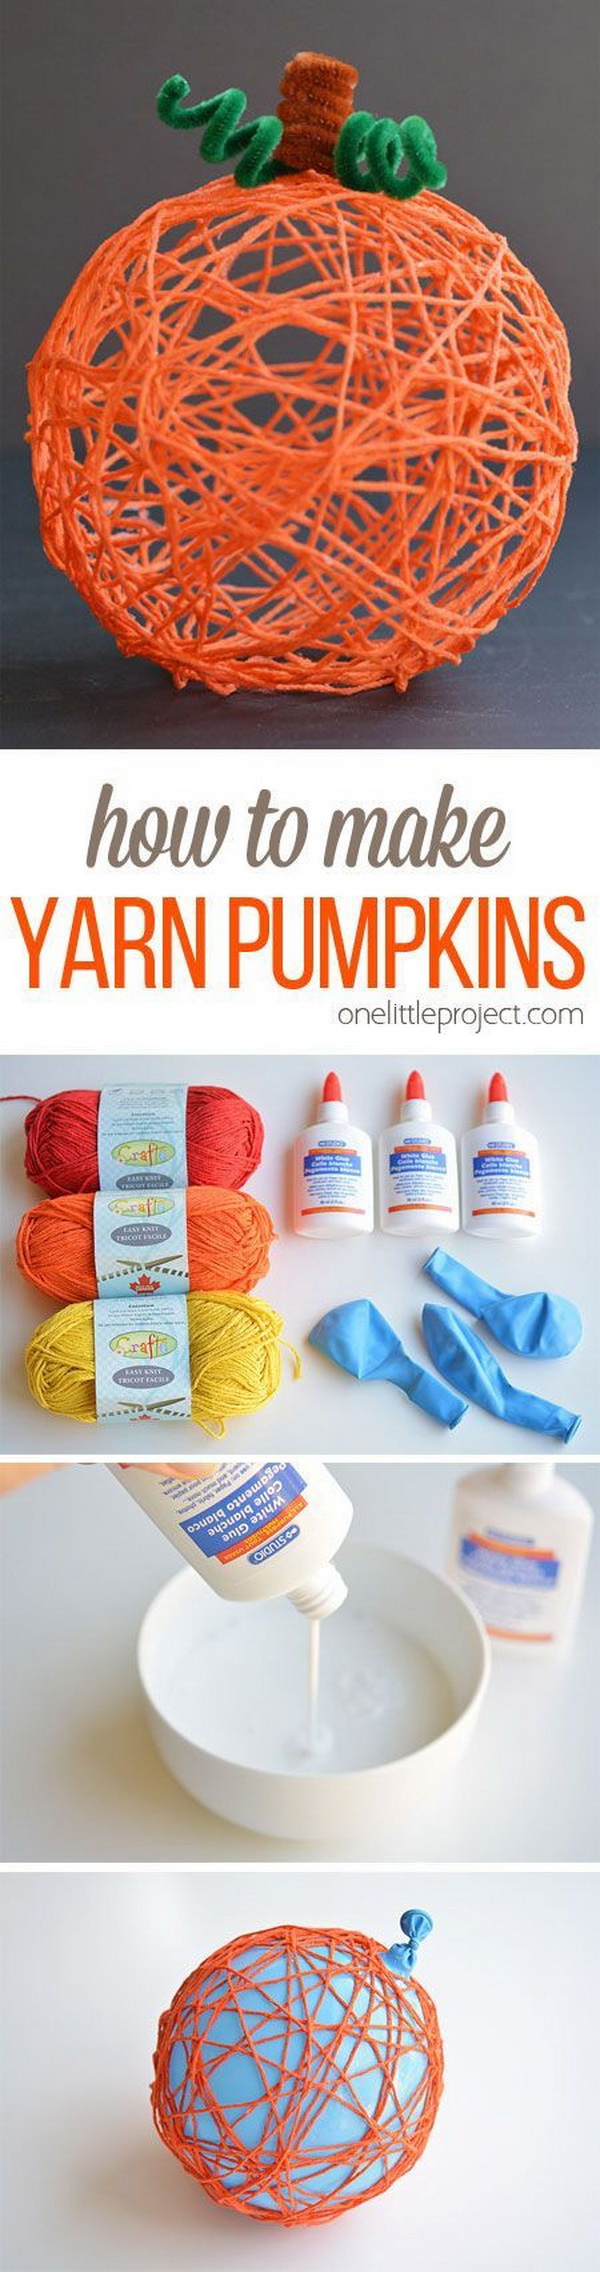 Yarn Pumpkins Using Balloons. Another fun fall craft idea! They make a fantastic centerpiece or mantle decoration for fall. Easy and fun to make within hours and get your little ones involved! 